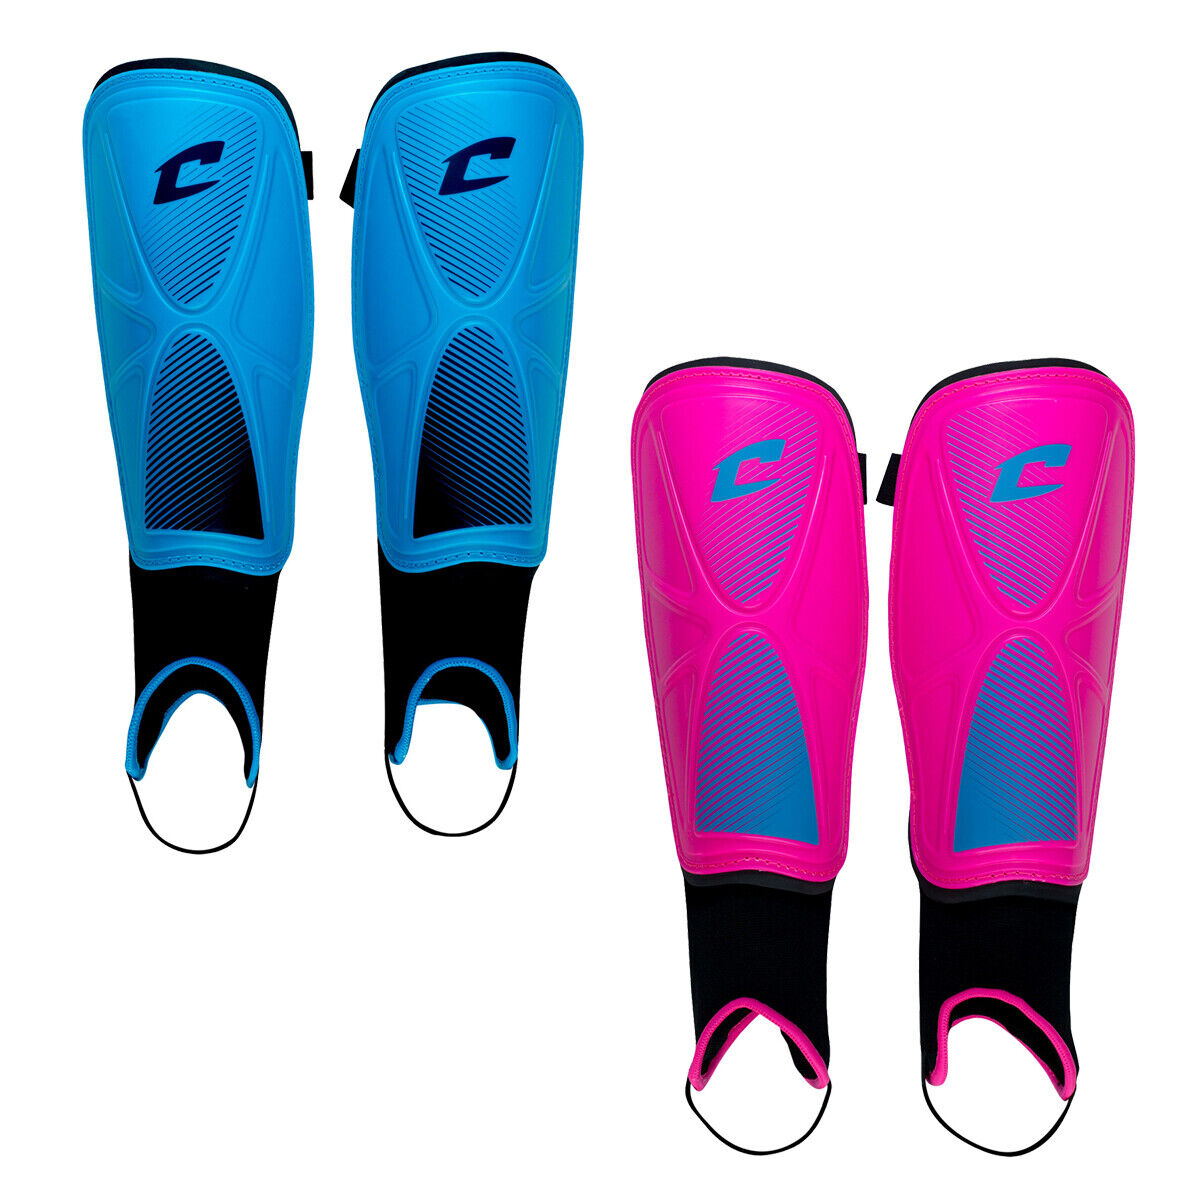 Cheap mail order shopping Champro D2 40% OFF Cheap Sale Soccer Shinguards - Optic Colors Various New Retai